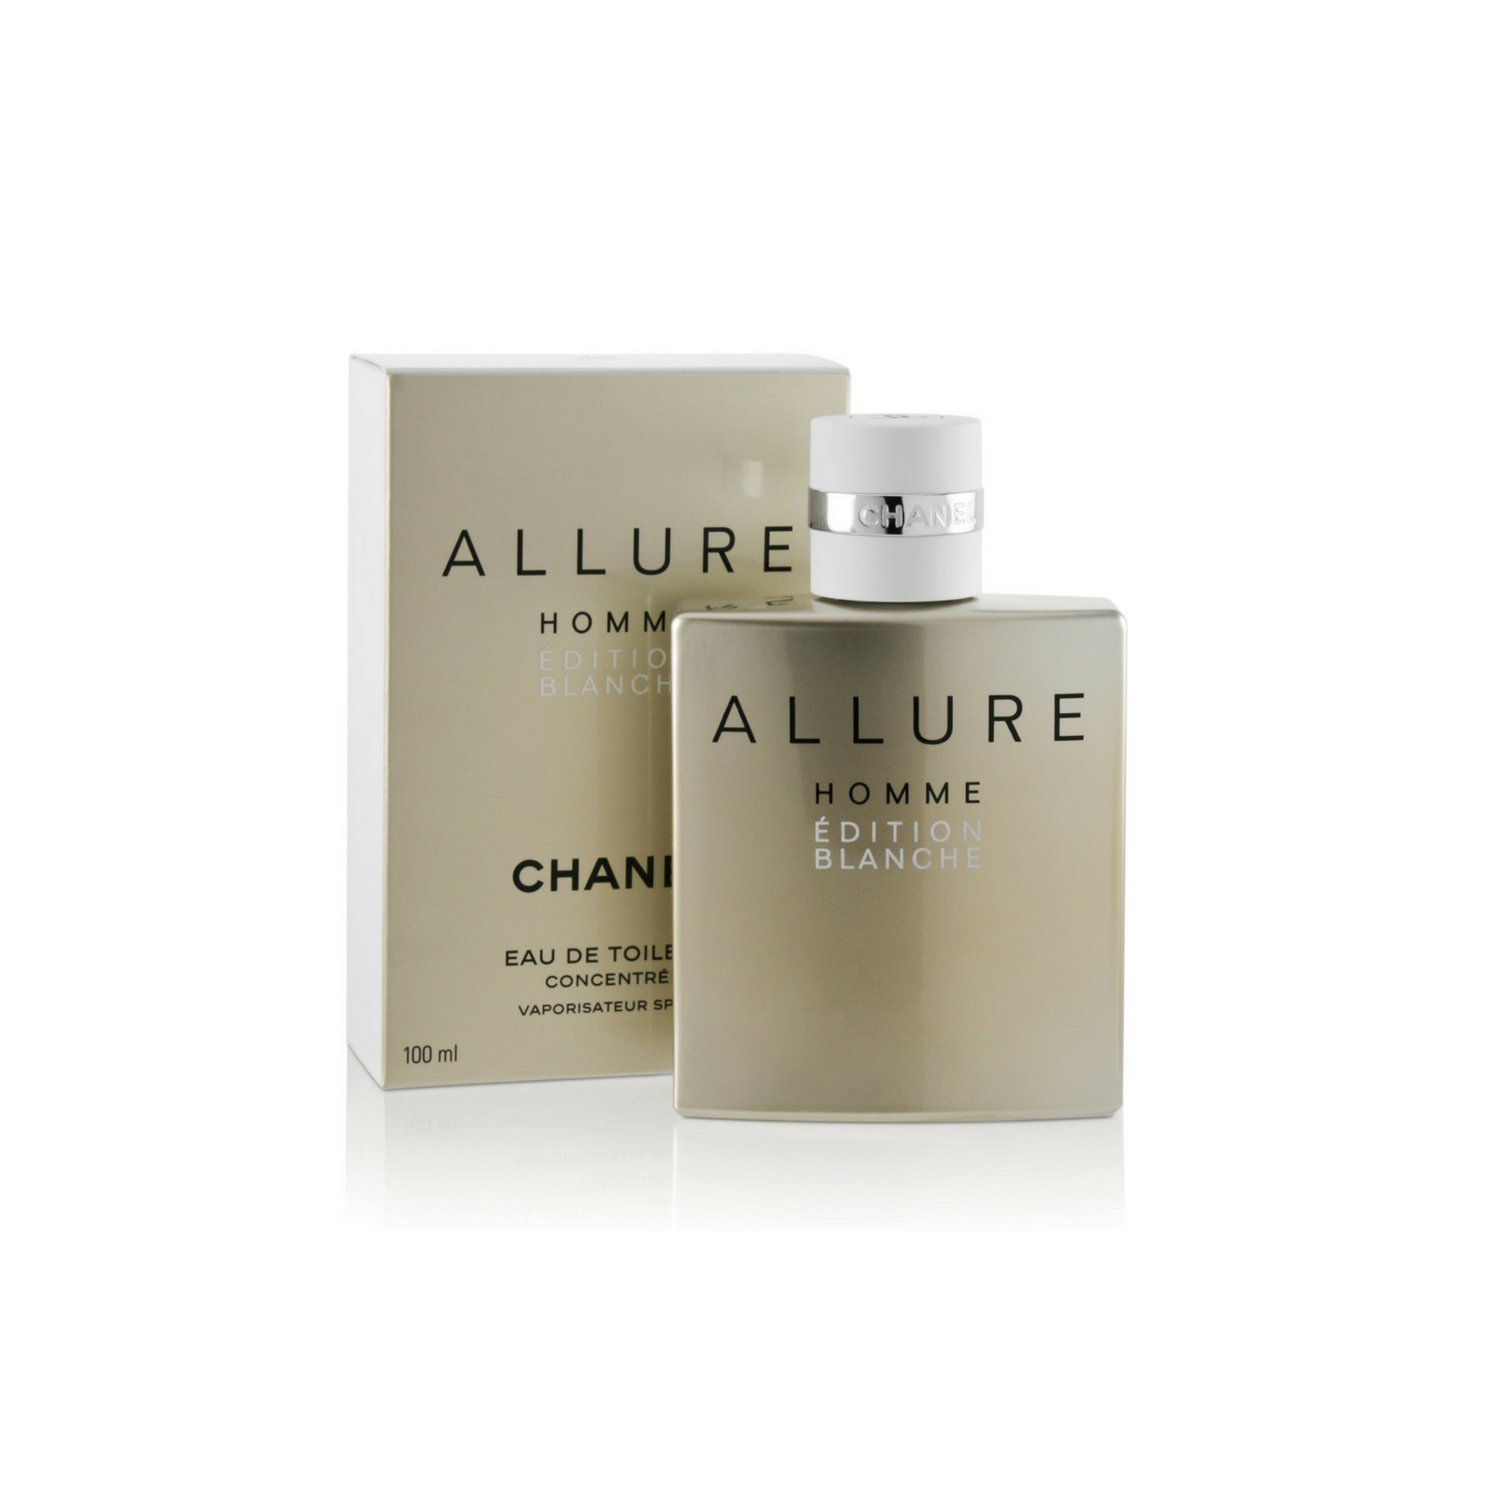 Chanel homme edition. Chanel Allure homme Edition Blanche. Шанель Аллюр Бланш. Chanel мужские. Allure homme Edition Blanche. Chanel Allure homme Edition Blanche парфюмерная вода 100мл.